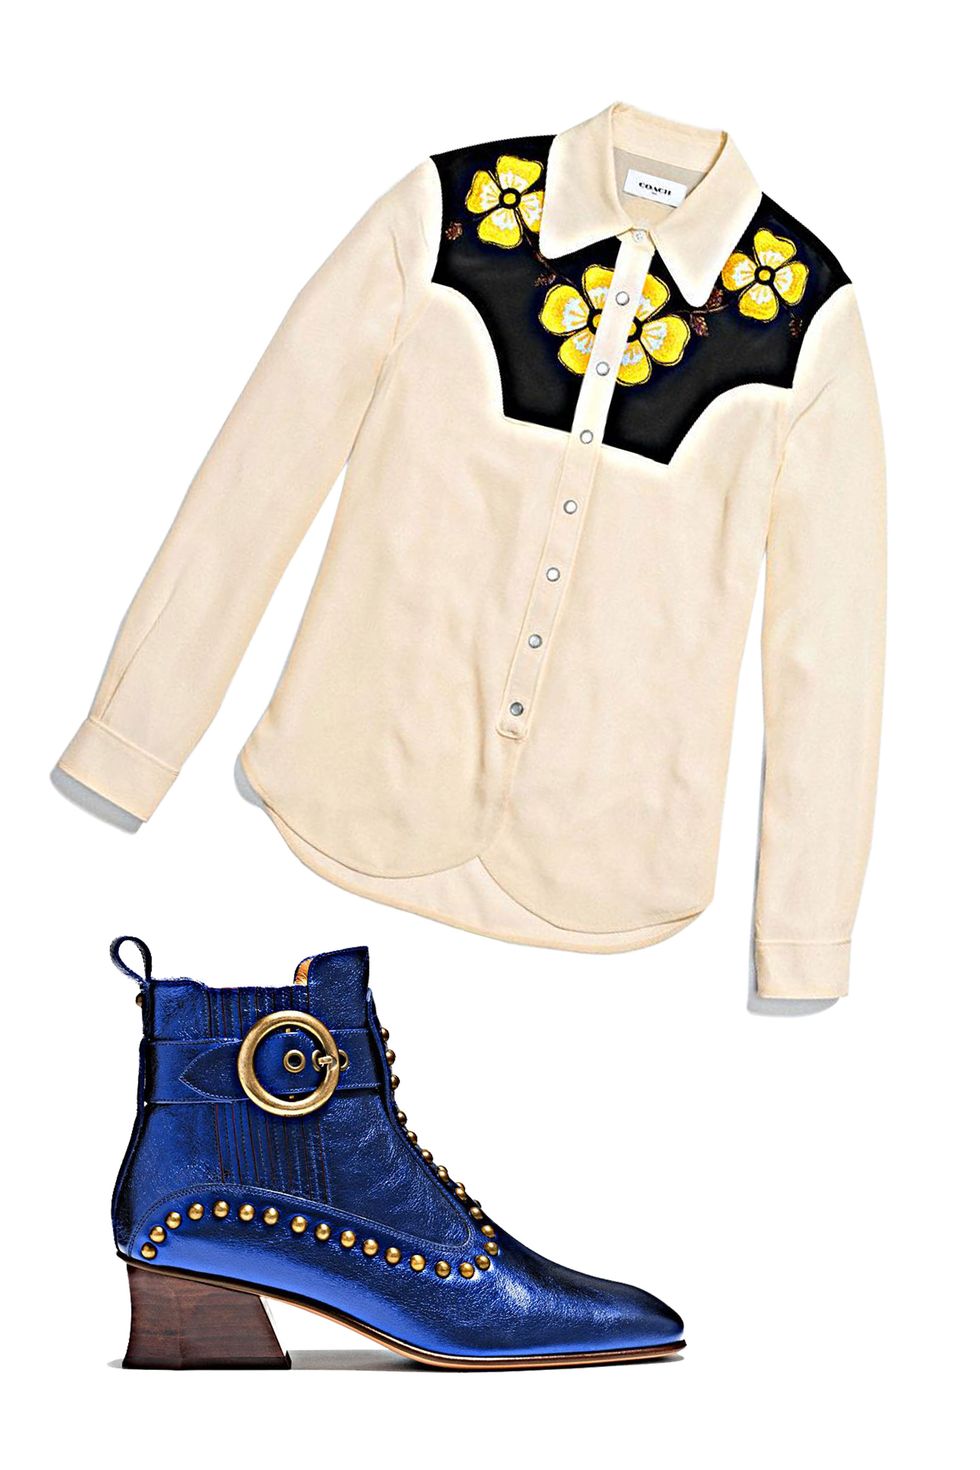 <p>For casual weeknights out with the girls—or a weekend night out dancing with friends—these bright blue boots and Western-inspired shirt are a fun and personality-driven pairing that'll work just as well with a cute pair of jeans or skirt (cowboy hat optional).
</p><p><br>
</p><p><em data-redactor-tag="em">Coach 1941 Western Shirt, $495, <a rel="noskim" href="http://www.coach.com/coach-designer-tops-western-shirt/56477.html?CID=D_B_HBZ_11853" target="_blank">coach.com</a>; Coach 1941 Chelsea Boot, $575, <a rel="noskim" href="http://www.coach.com/coach-designer-booties-chelsea-boot/Q8915.html?CID=D_B_HBZ_11854" target="_blank">coach.com</a></em><span class="redactor-invisible-space" data-verified="redactor" data-redactor-tag="span" data-redactor-class="redactor-invisible-space"><em data-redactor-tag="em"></em></span><br></p>